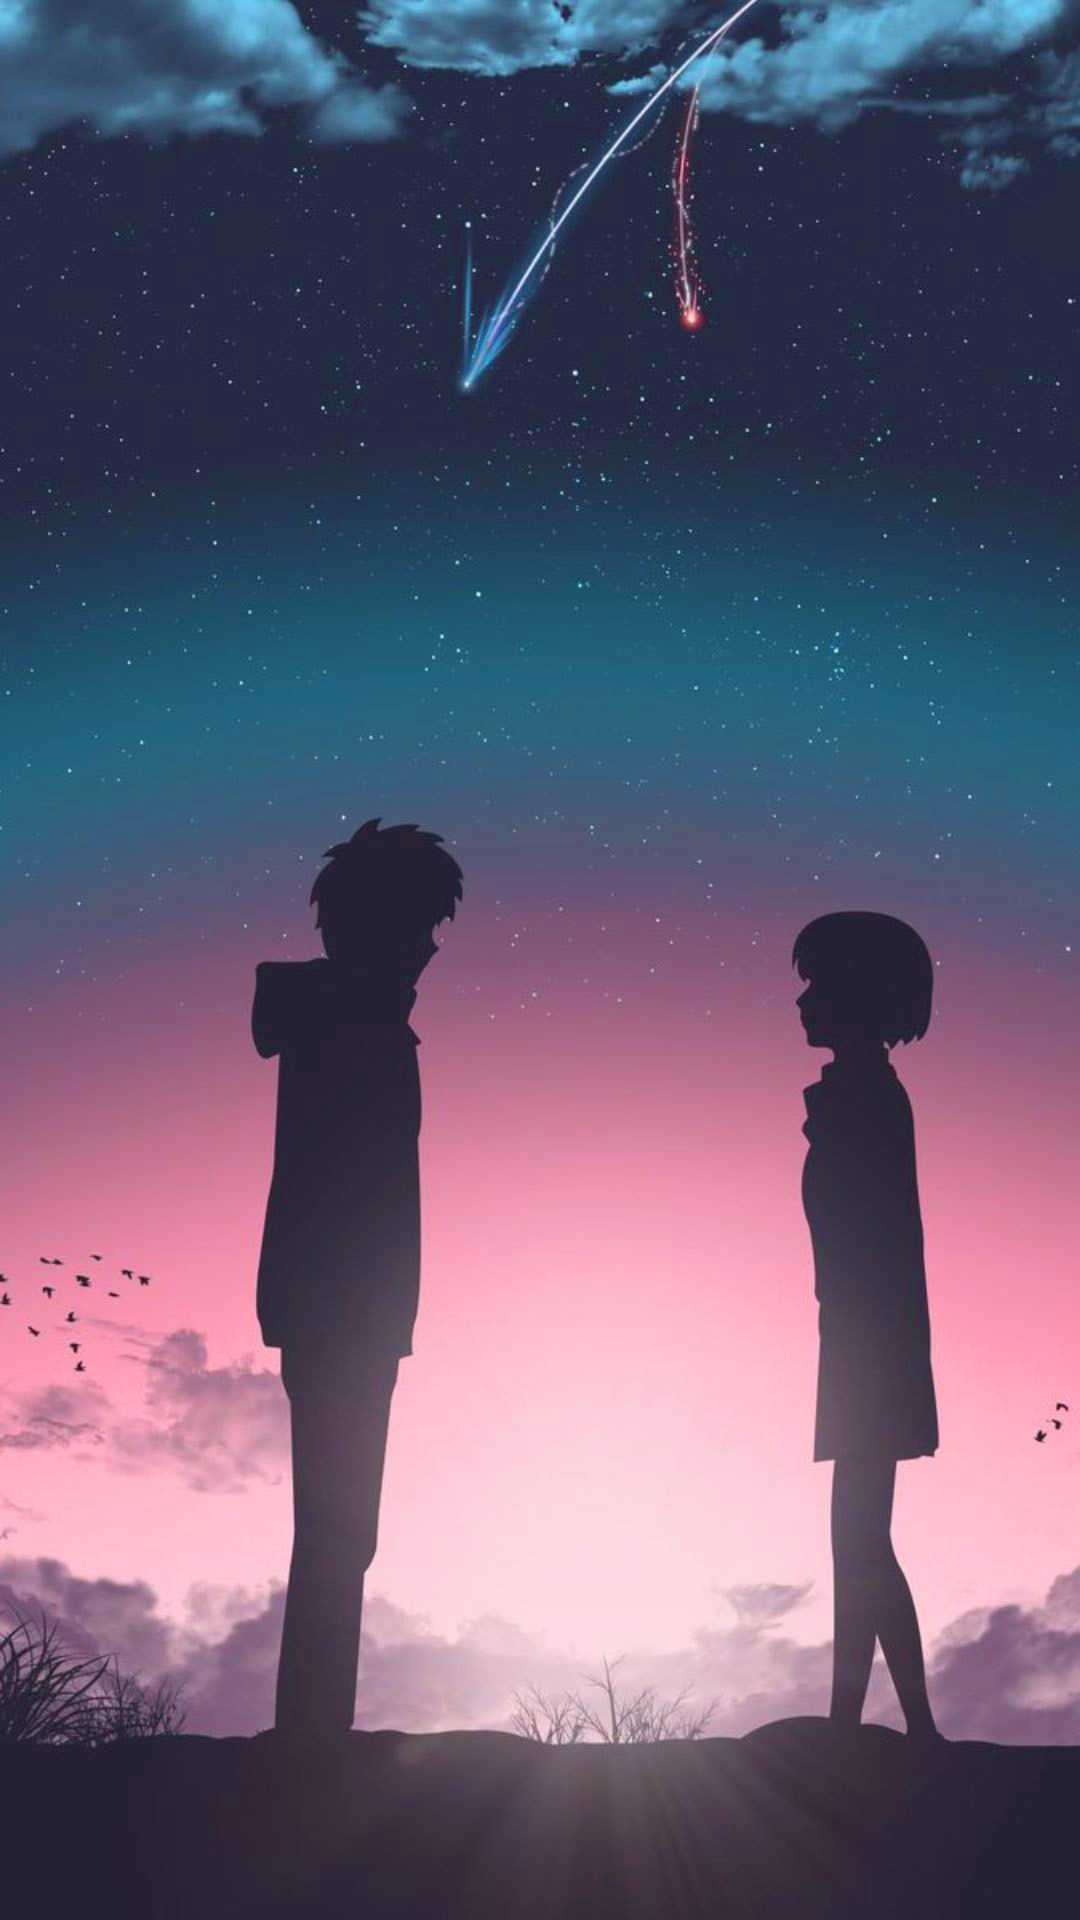 Your Name Wallpaper - iXpap